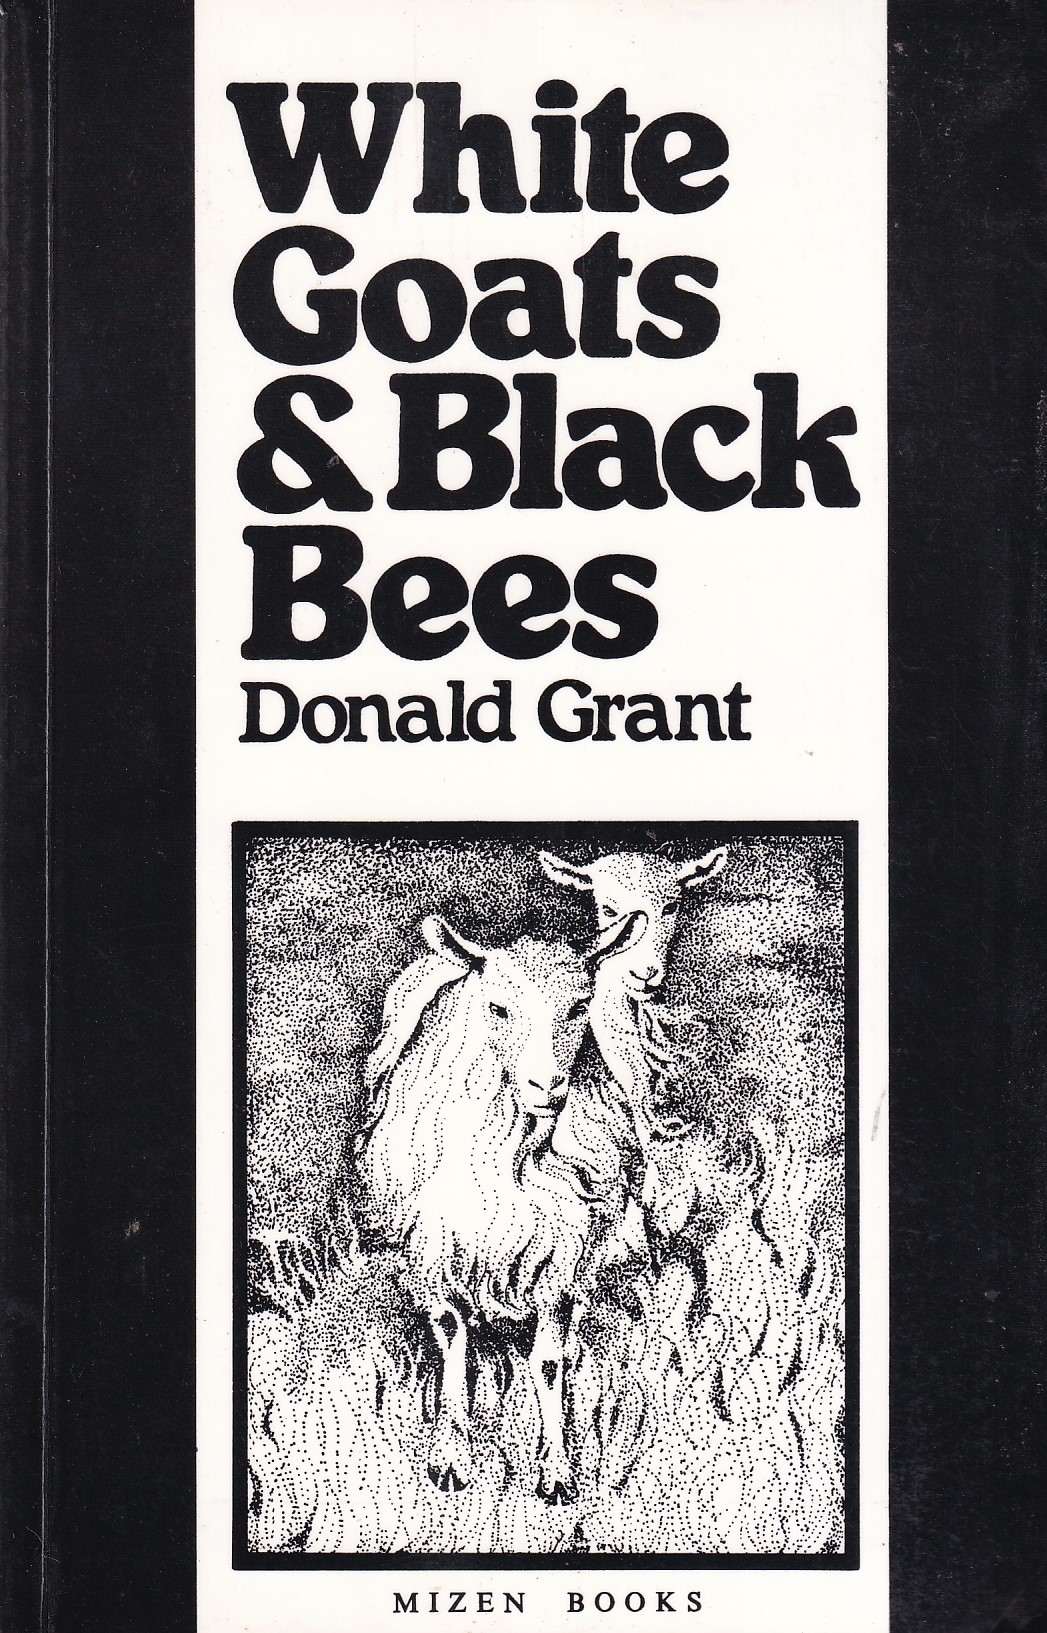 White Goats and Black Bees by Donald Grant